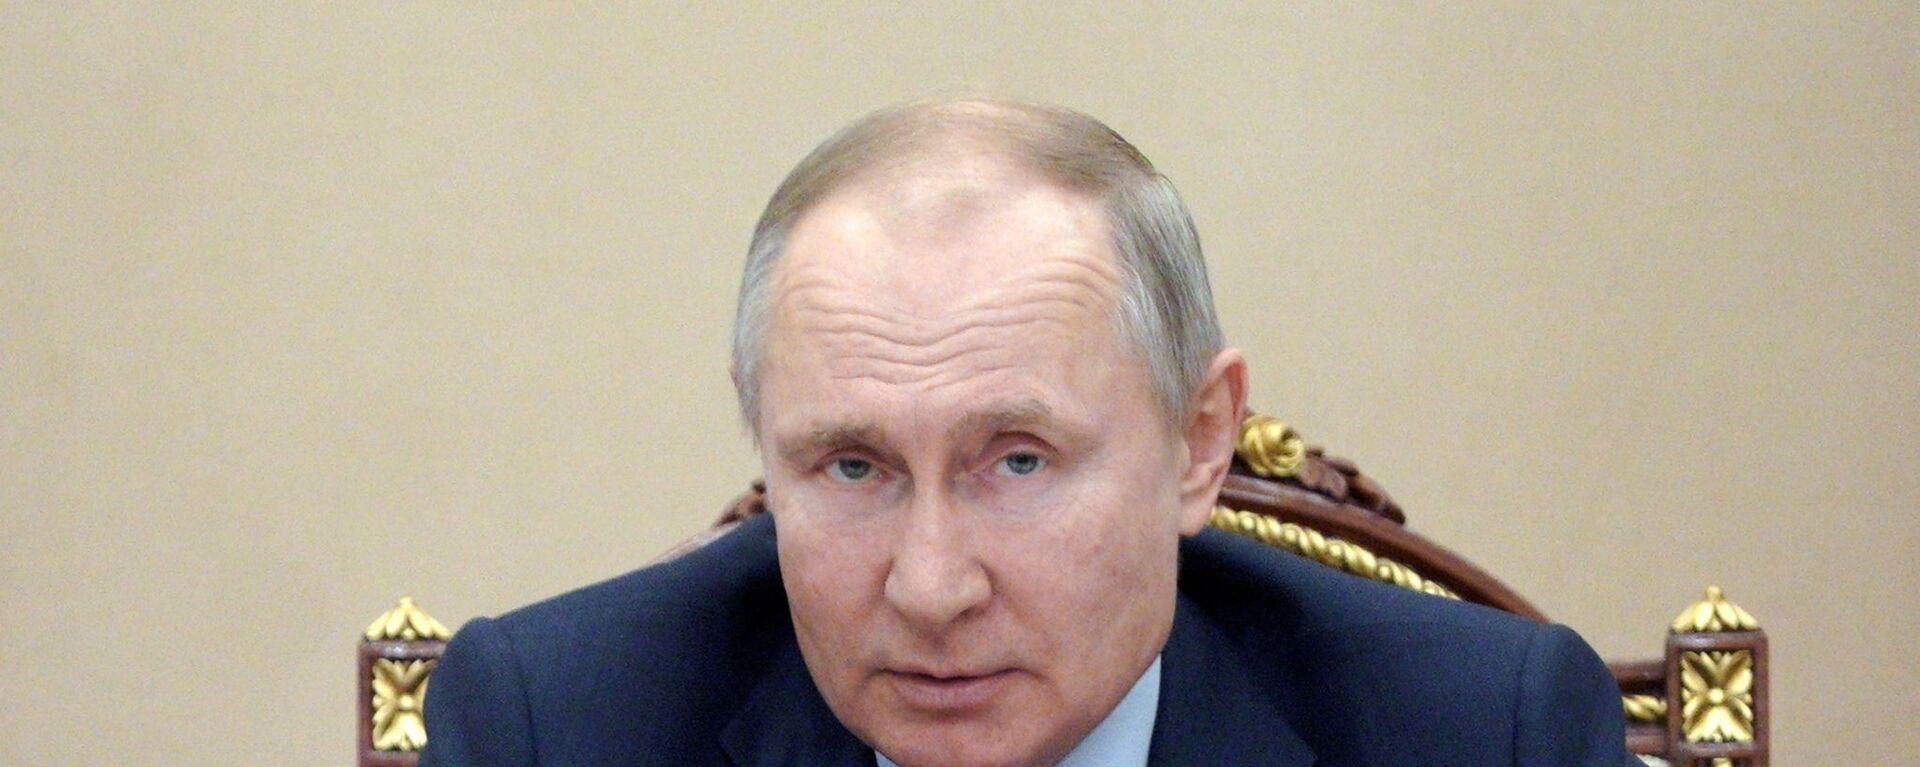 Russian President Vladimir Putin attends a meeting with government members via a video link in Moscow, Russia March 10, 2021 - Sputnik International, 1920